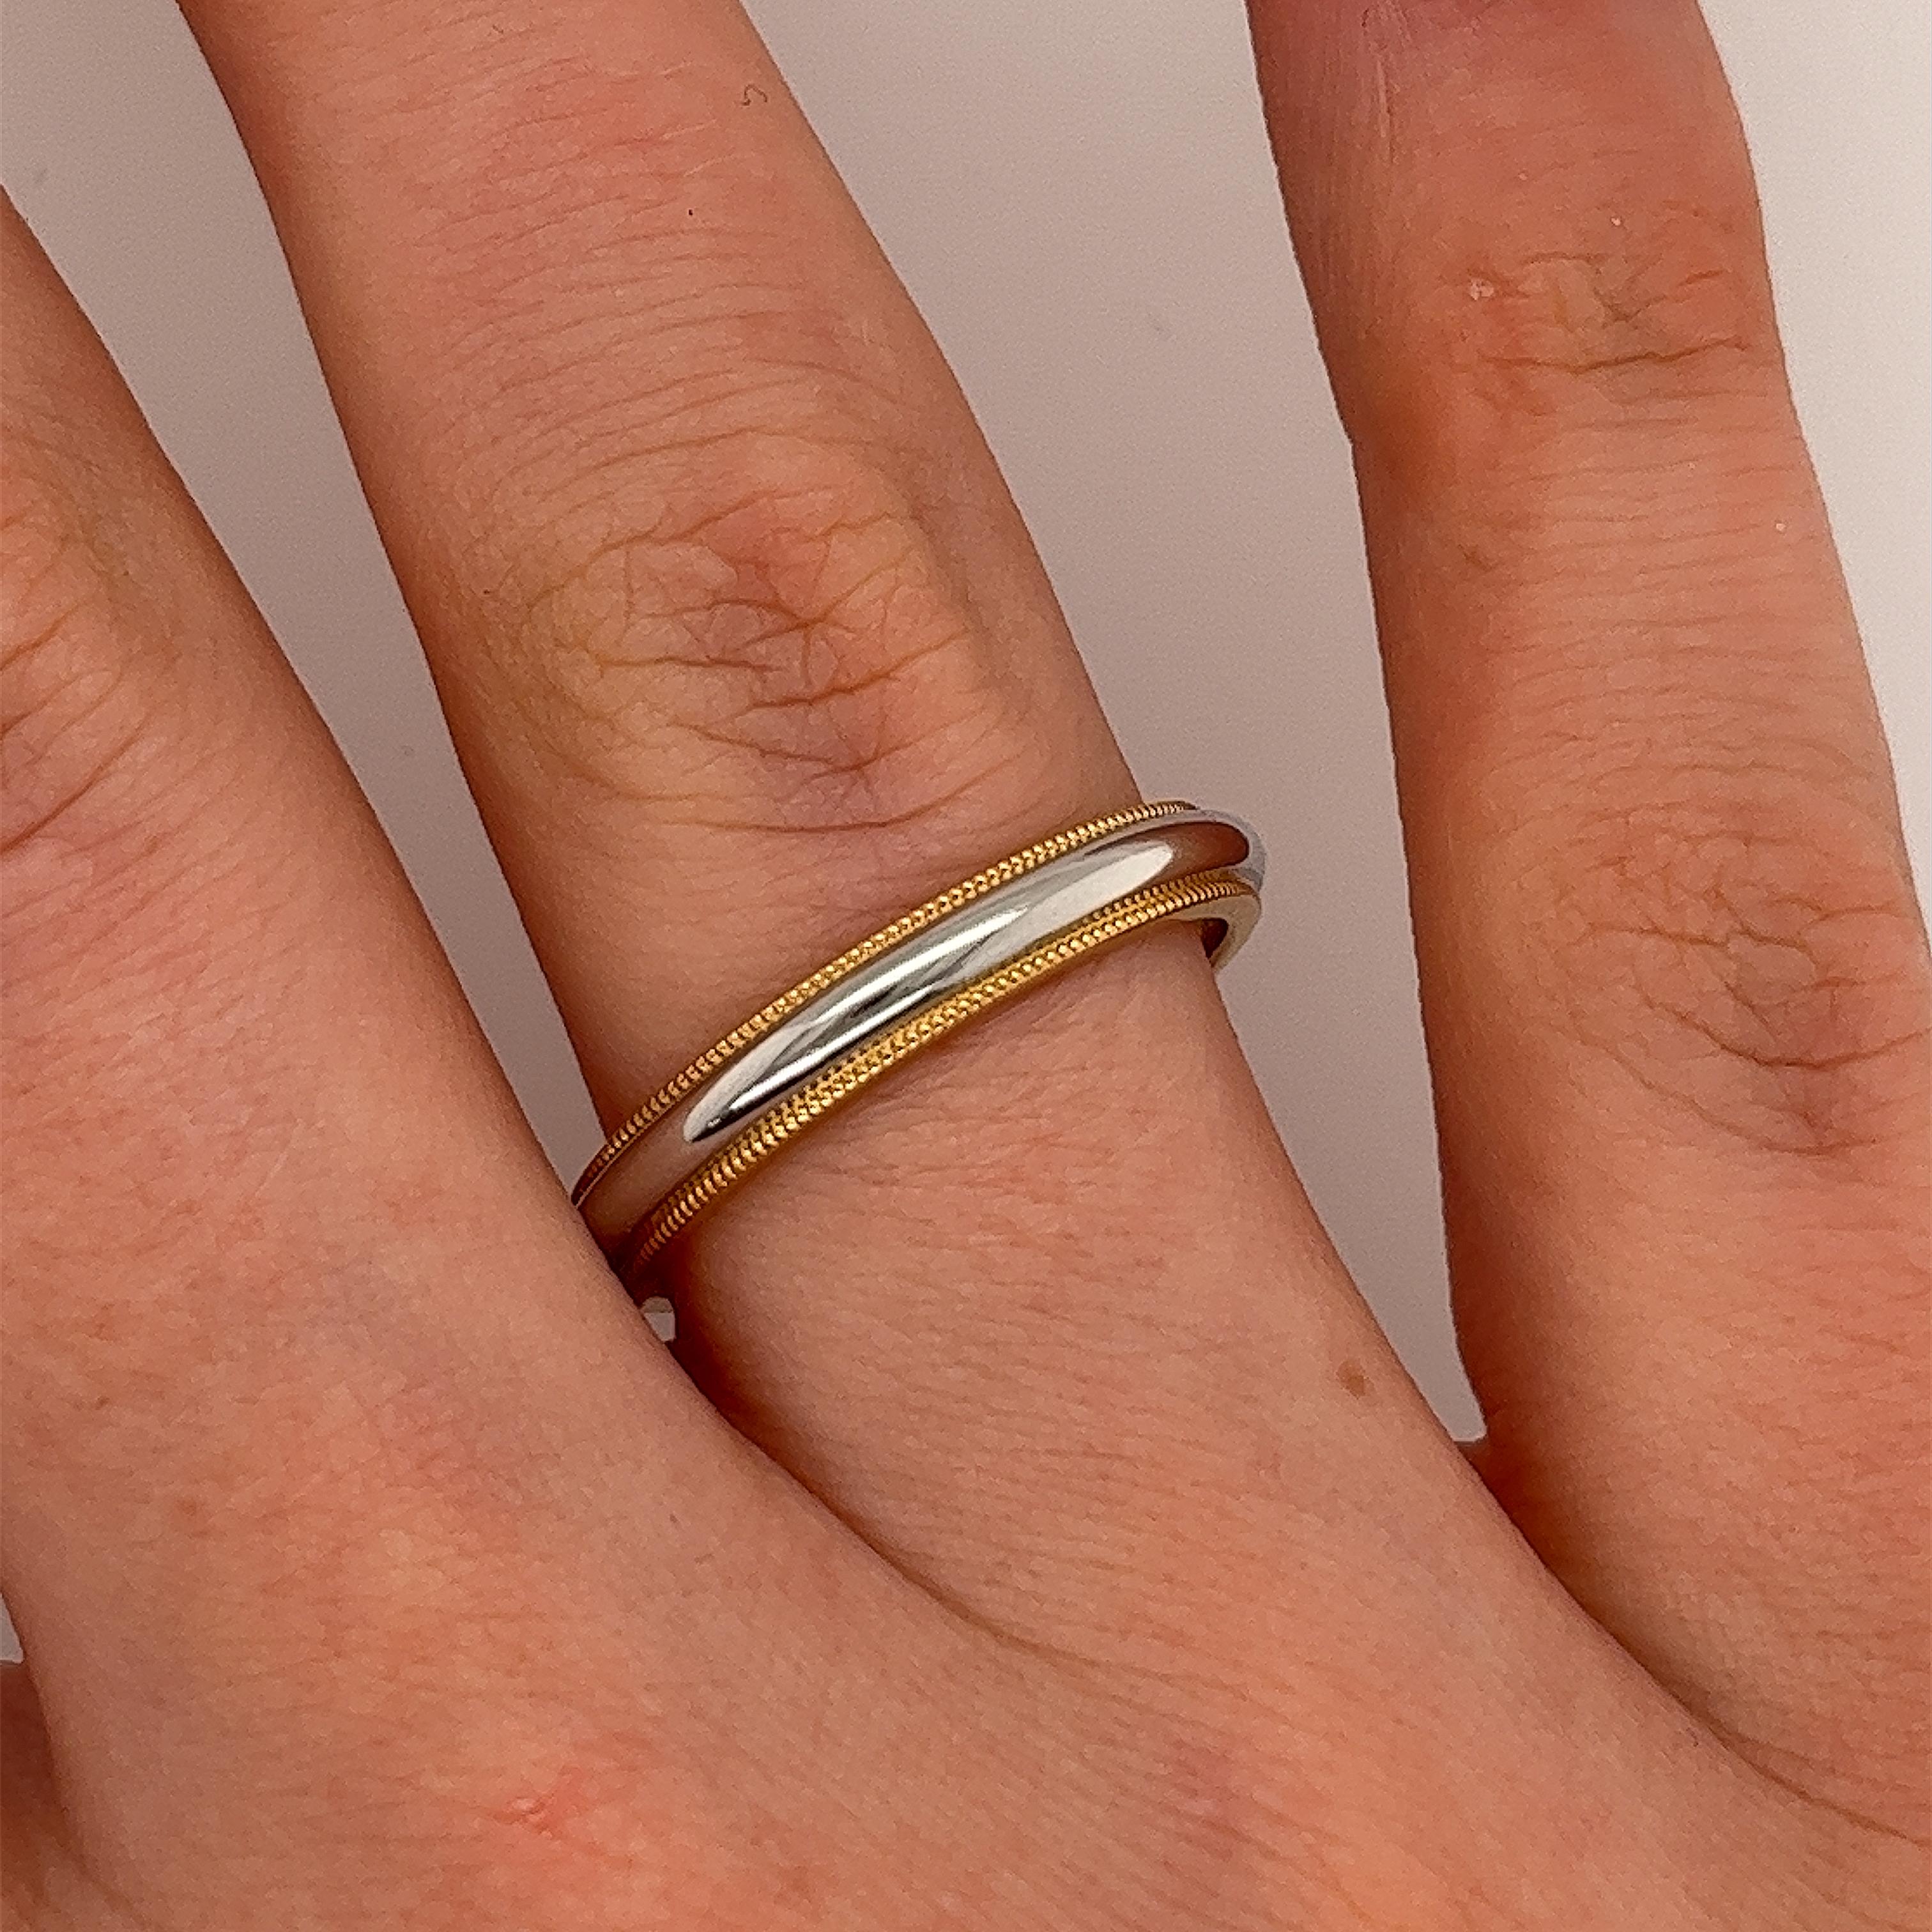 Tiffany & Co. Milgrain two tone 18ct yellow gold and platinum wedding band 3.4mm In Excellent Condition For Sale In London, GB